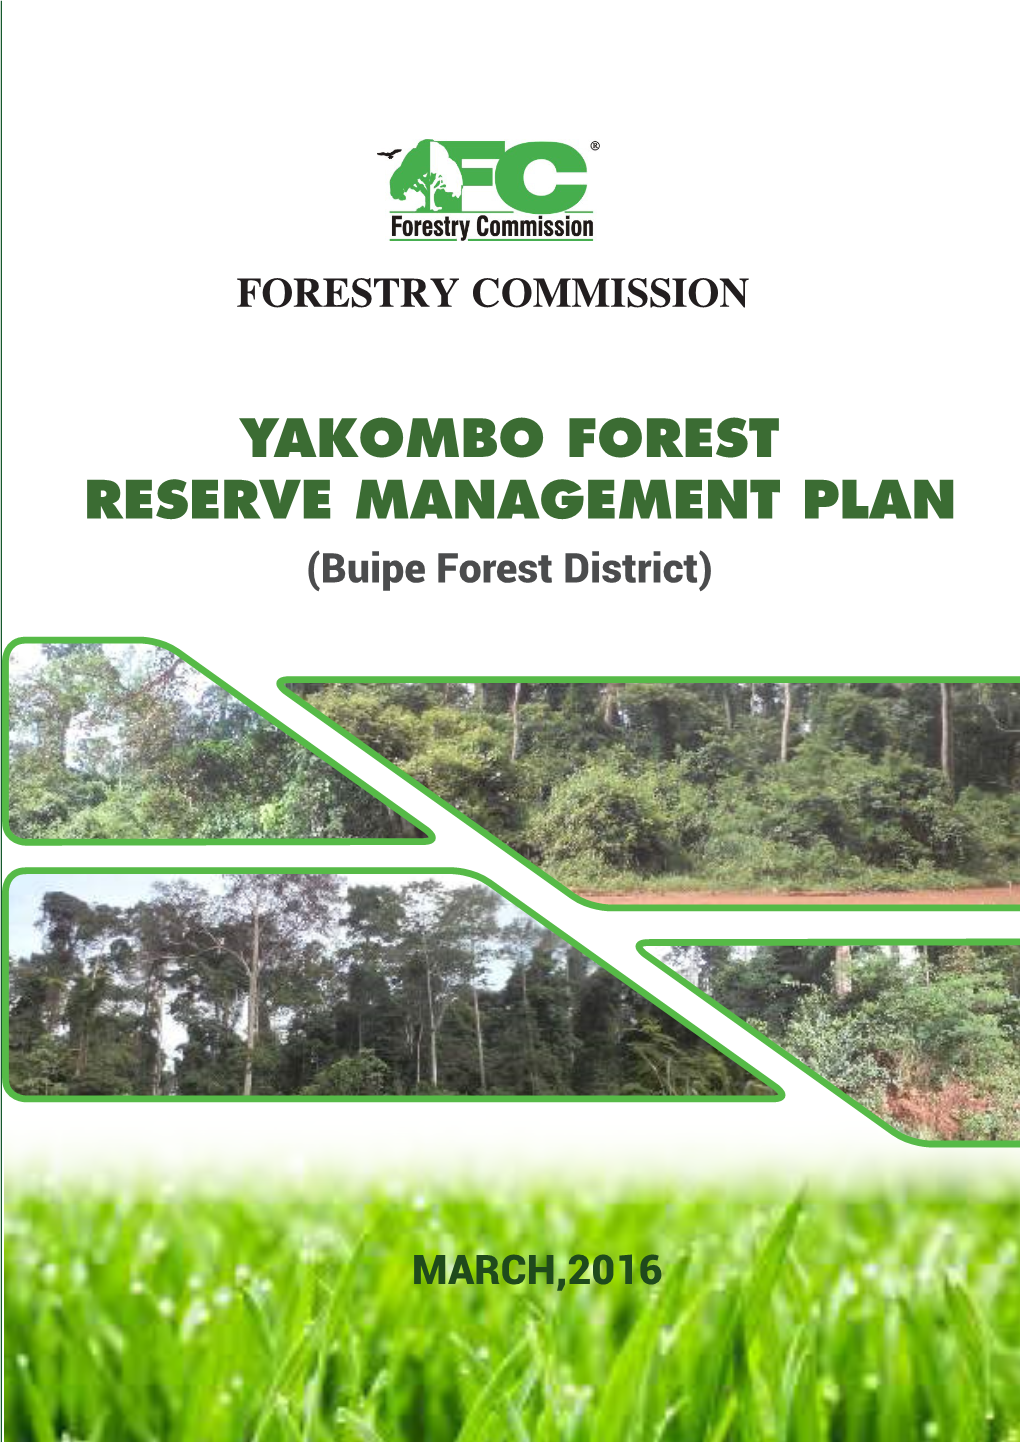 YAKOMBO FOREST RESERVE MANAGEMENT PLAN (Buipe Forest District)